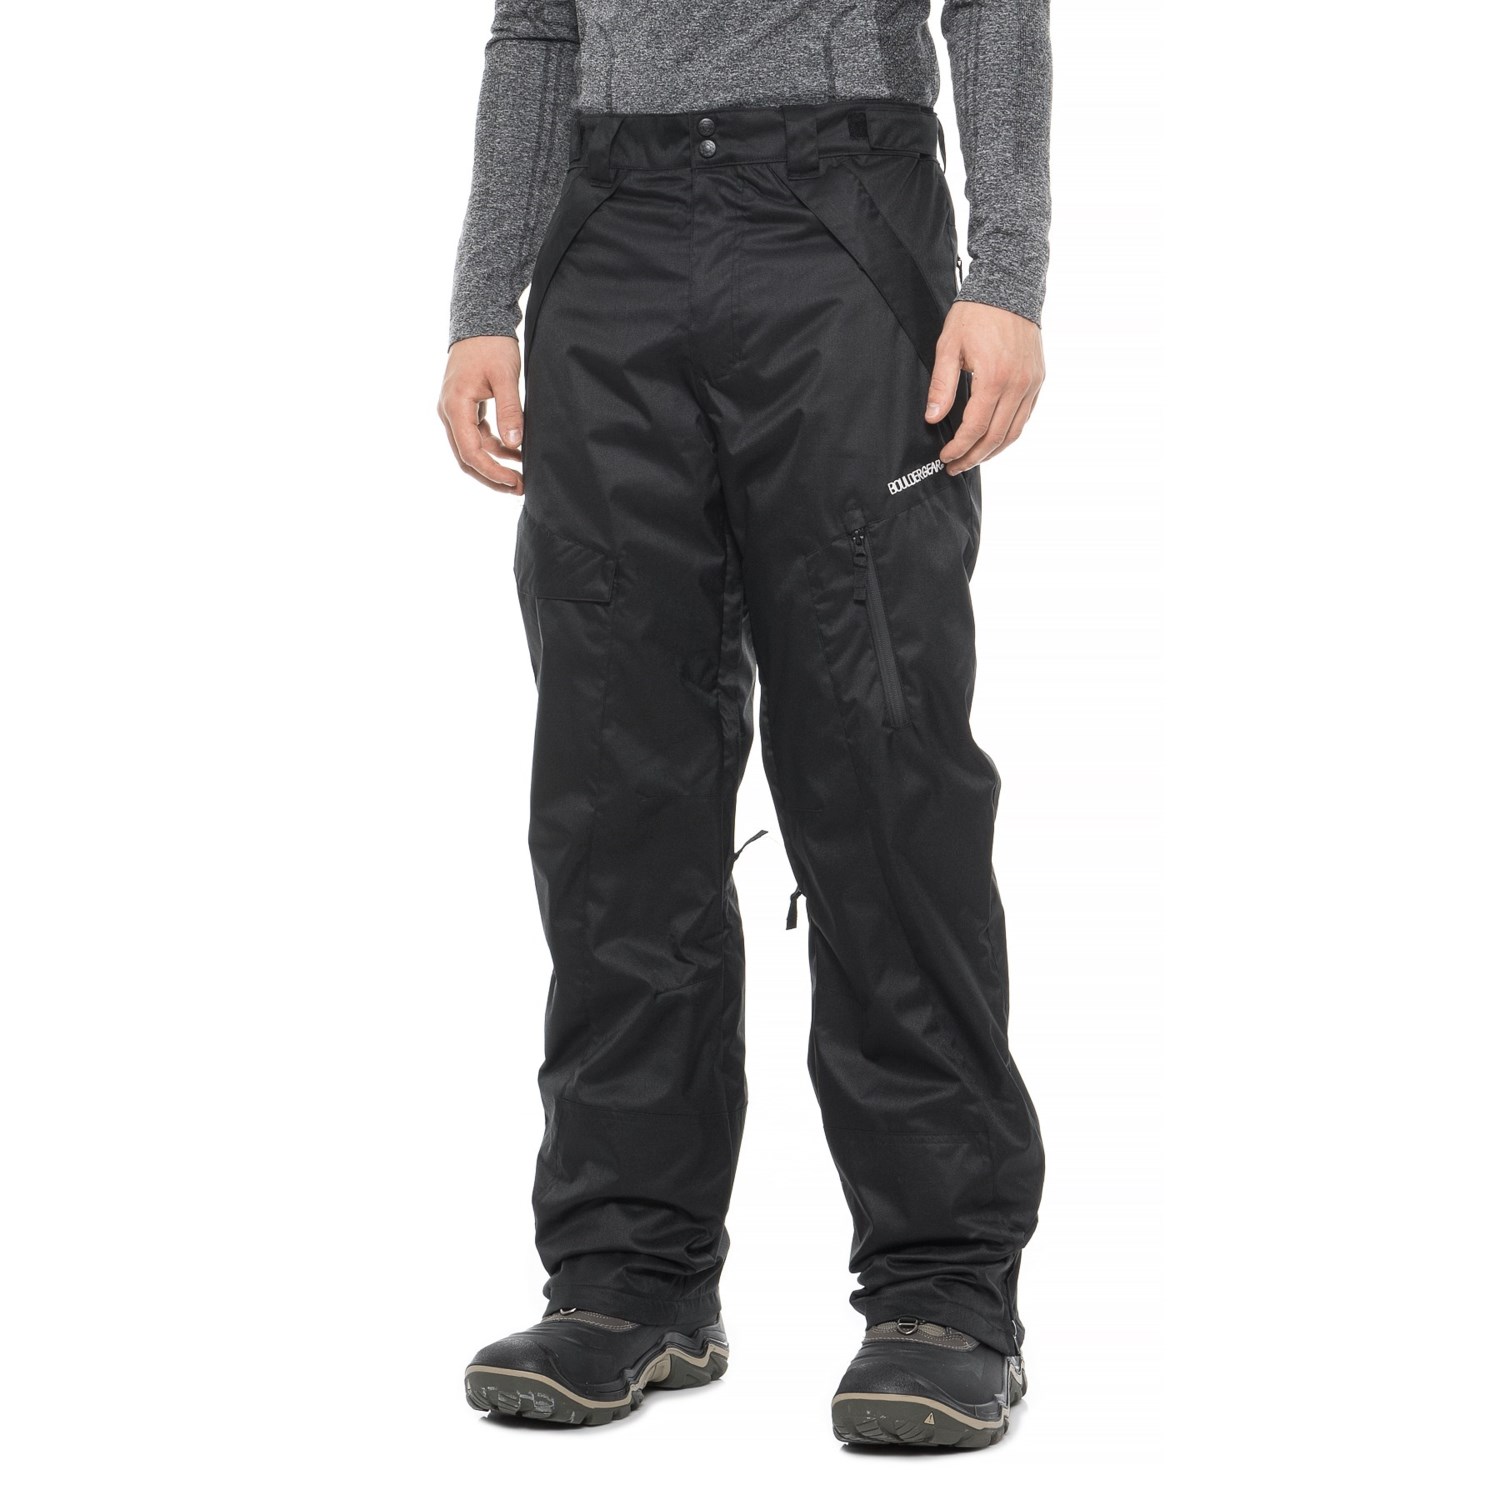 Boulder Gear Payload Cargo Ski Pants – Insulated (For Men)